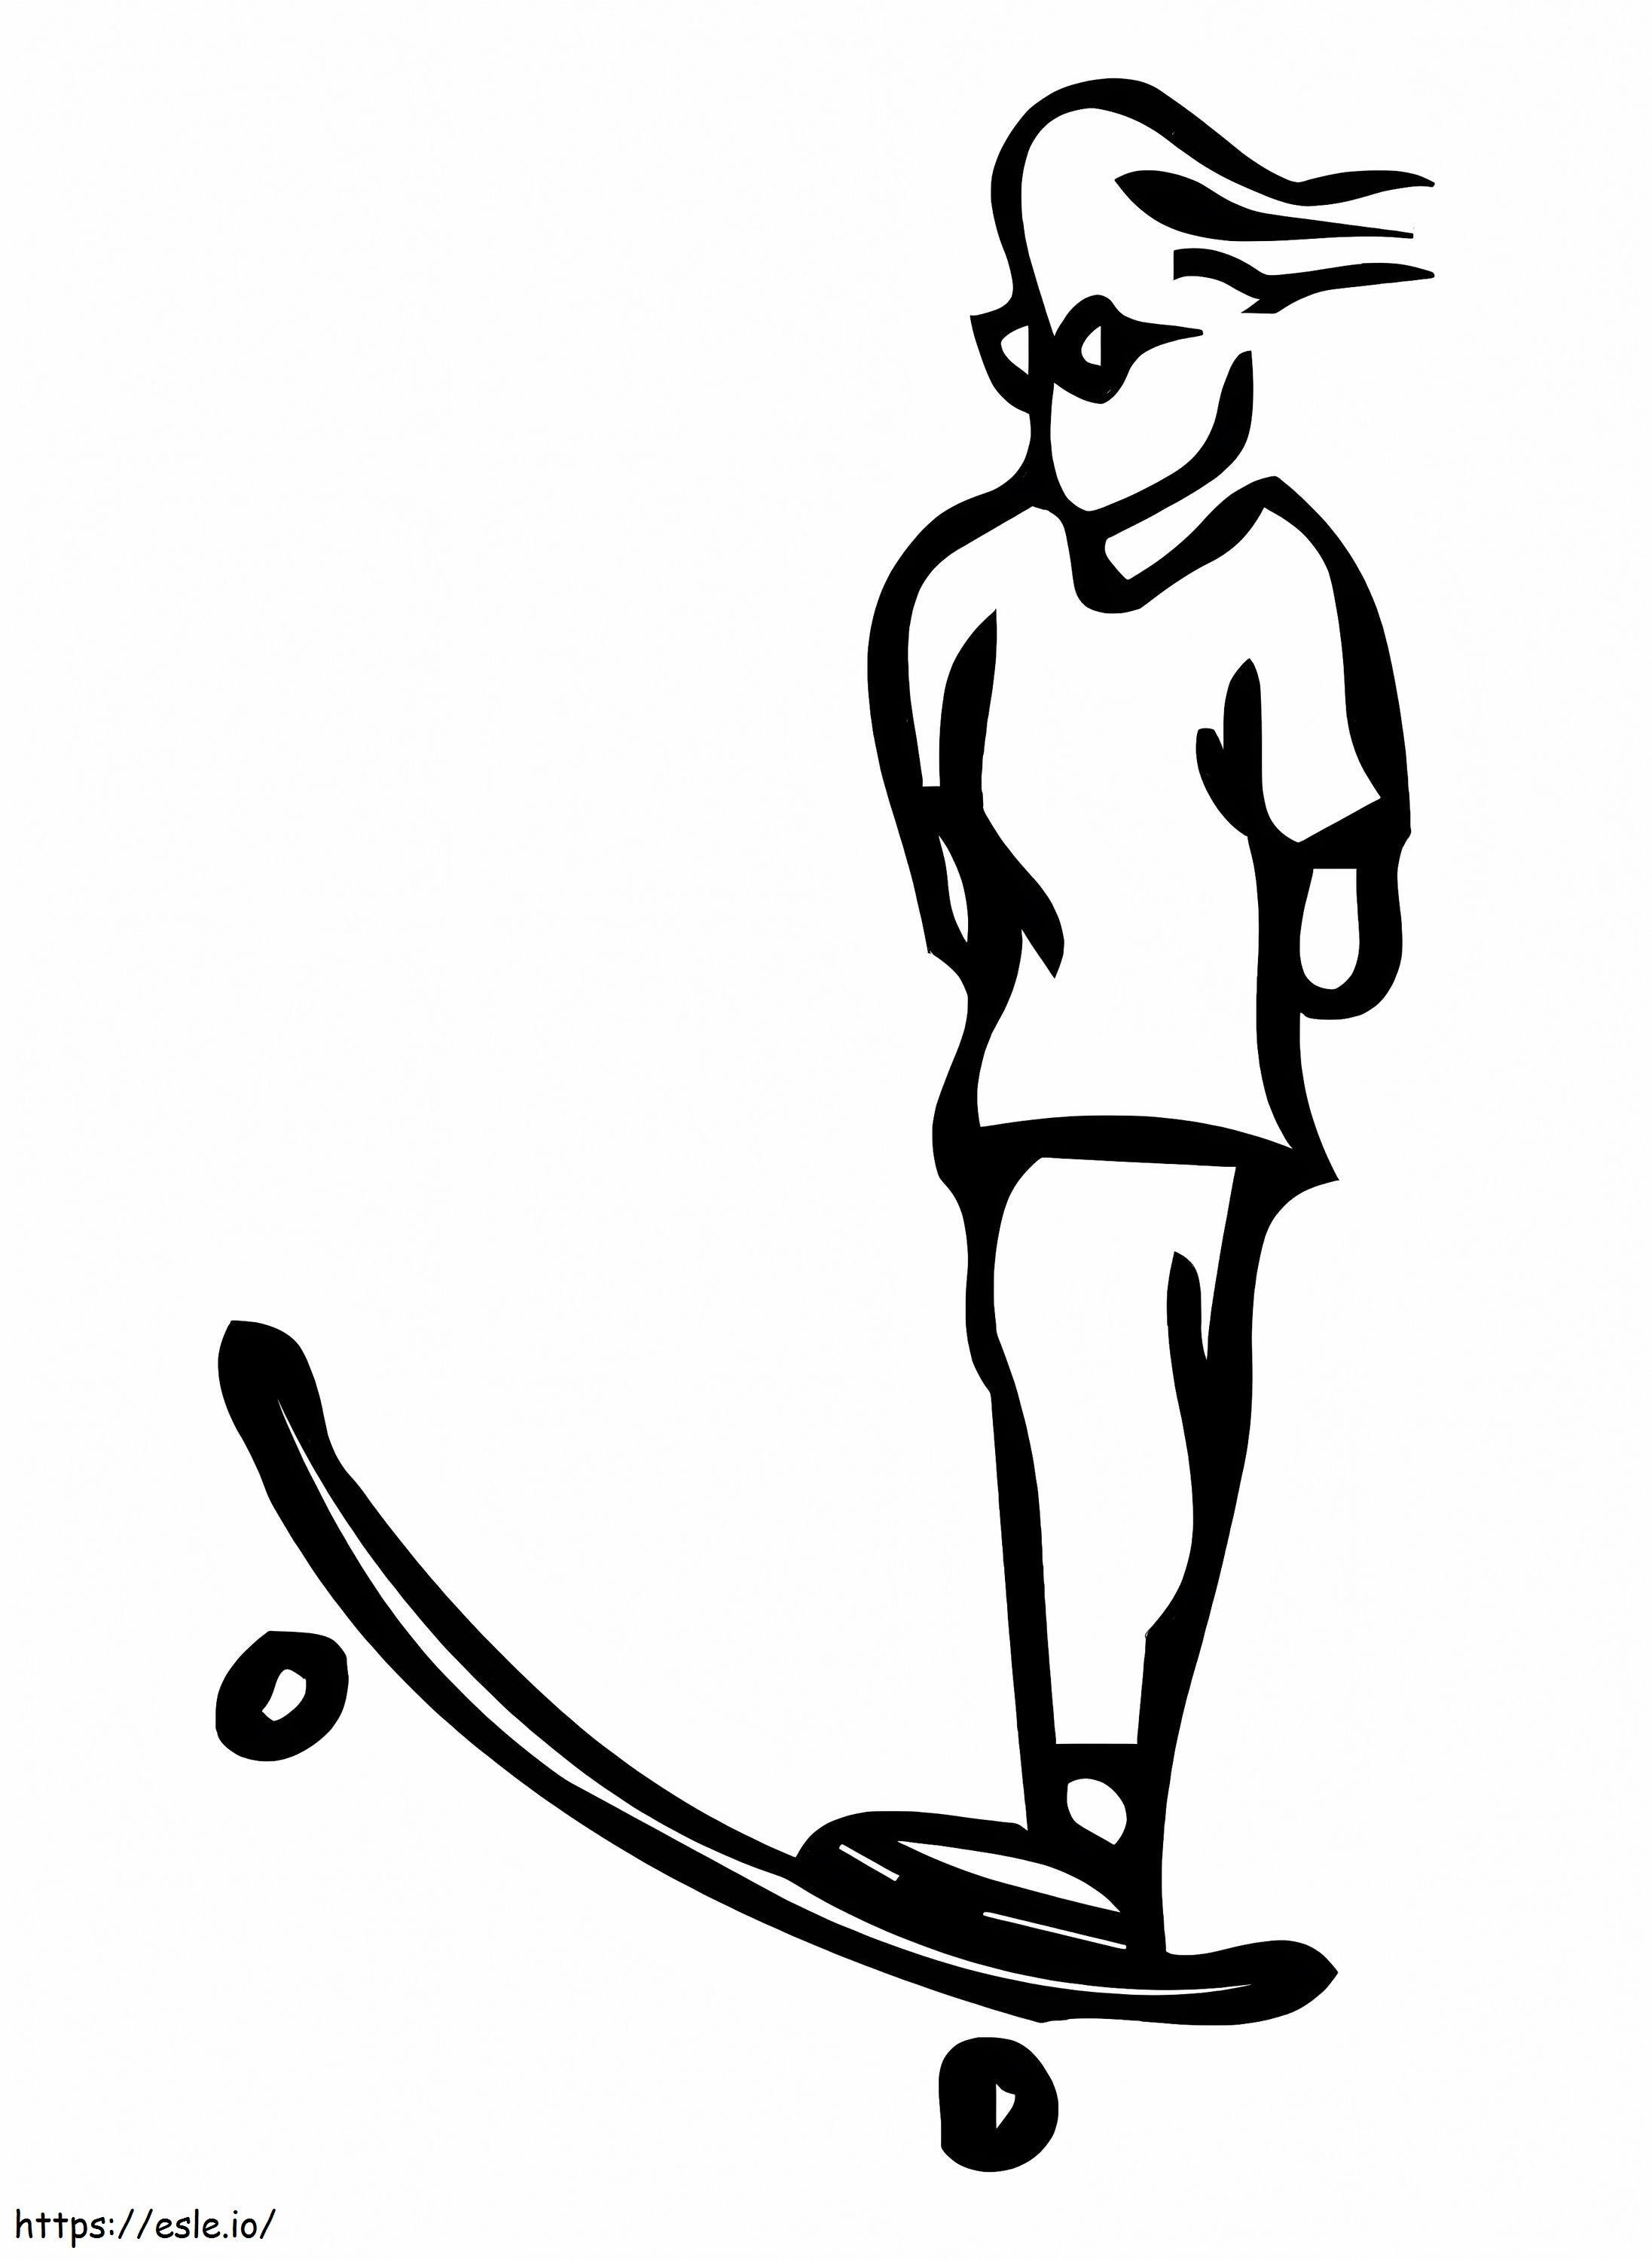 Letter J People On Skateboard coloring page